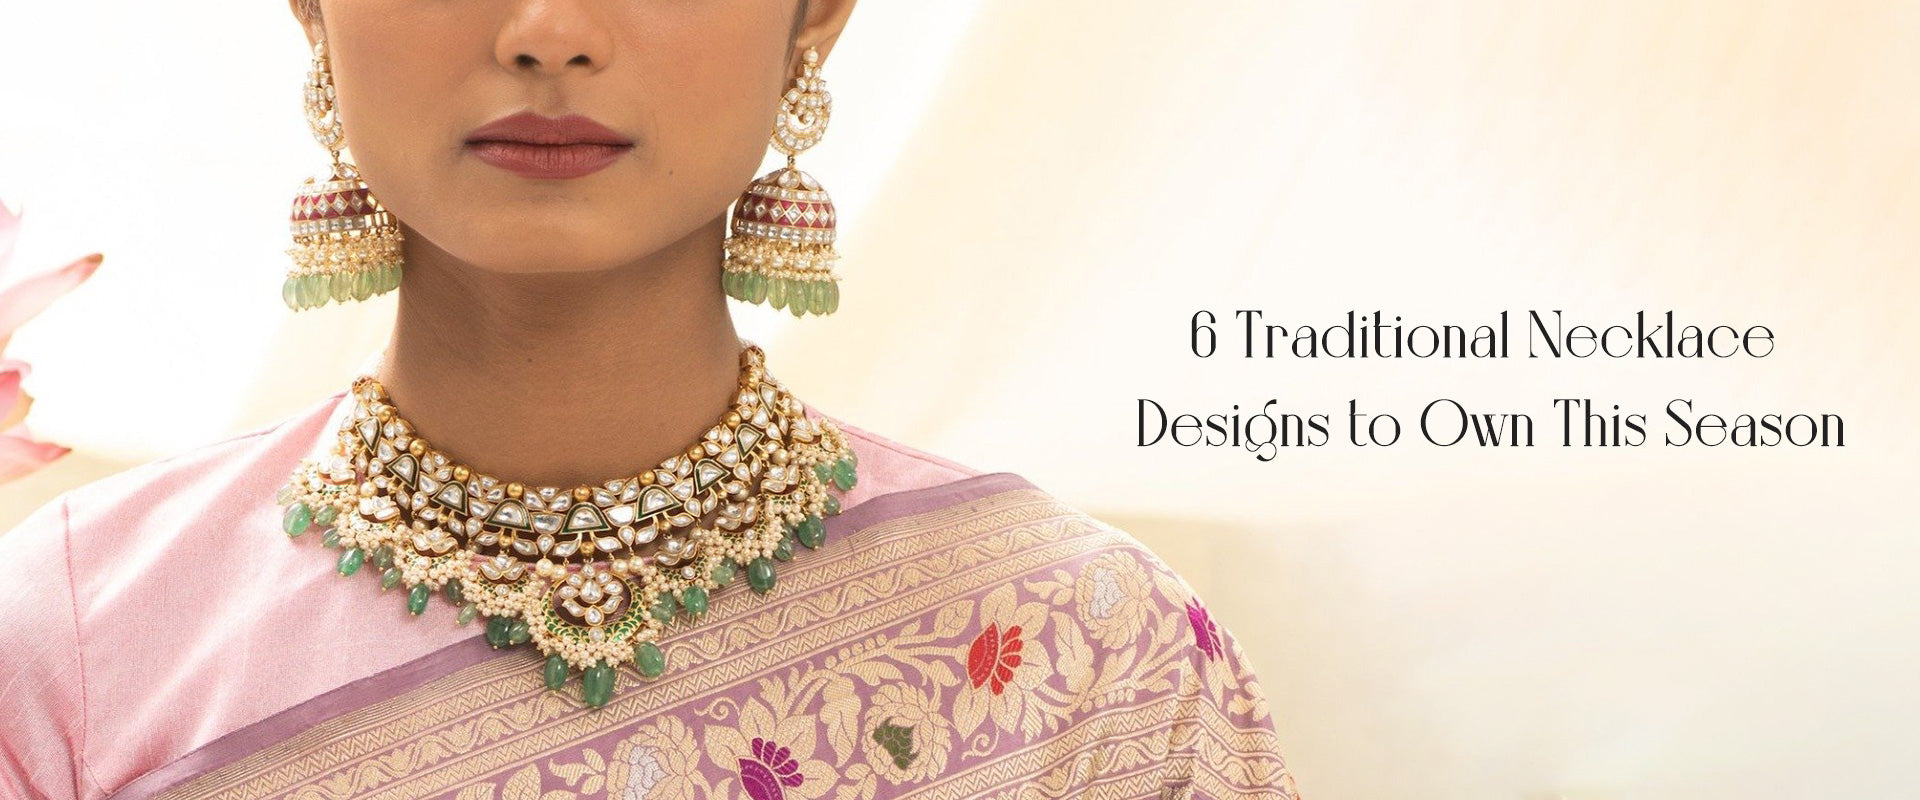 6 Traditional Necklace Designs to Own This Season - Paksha